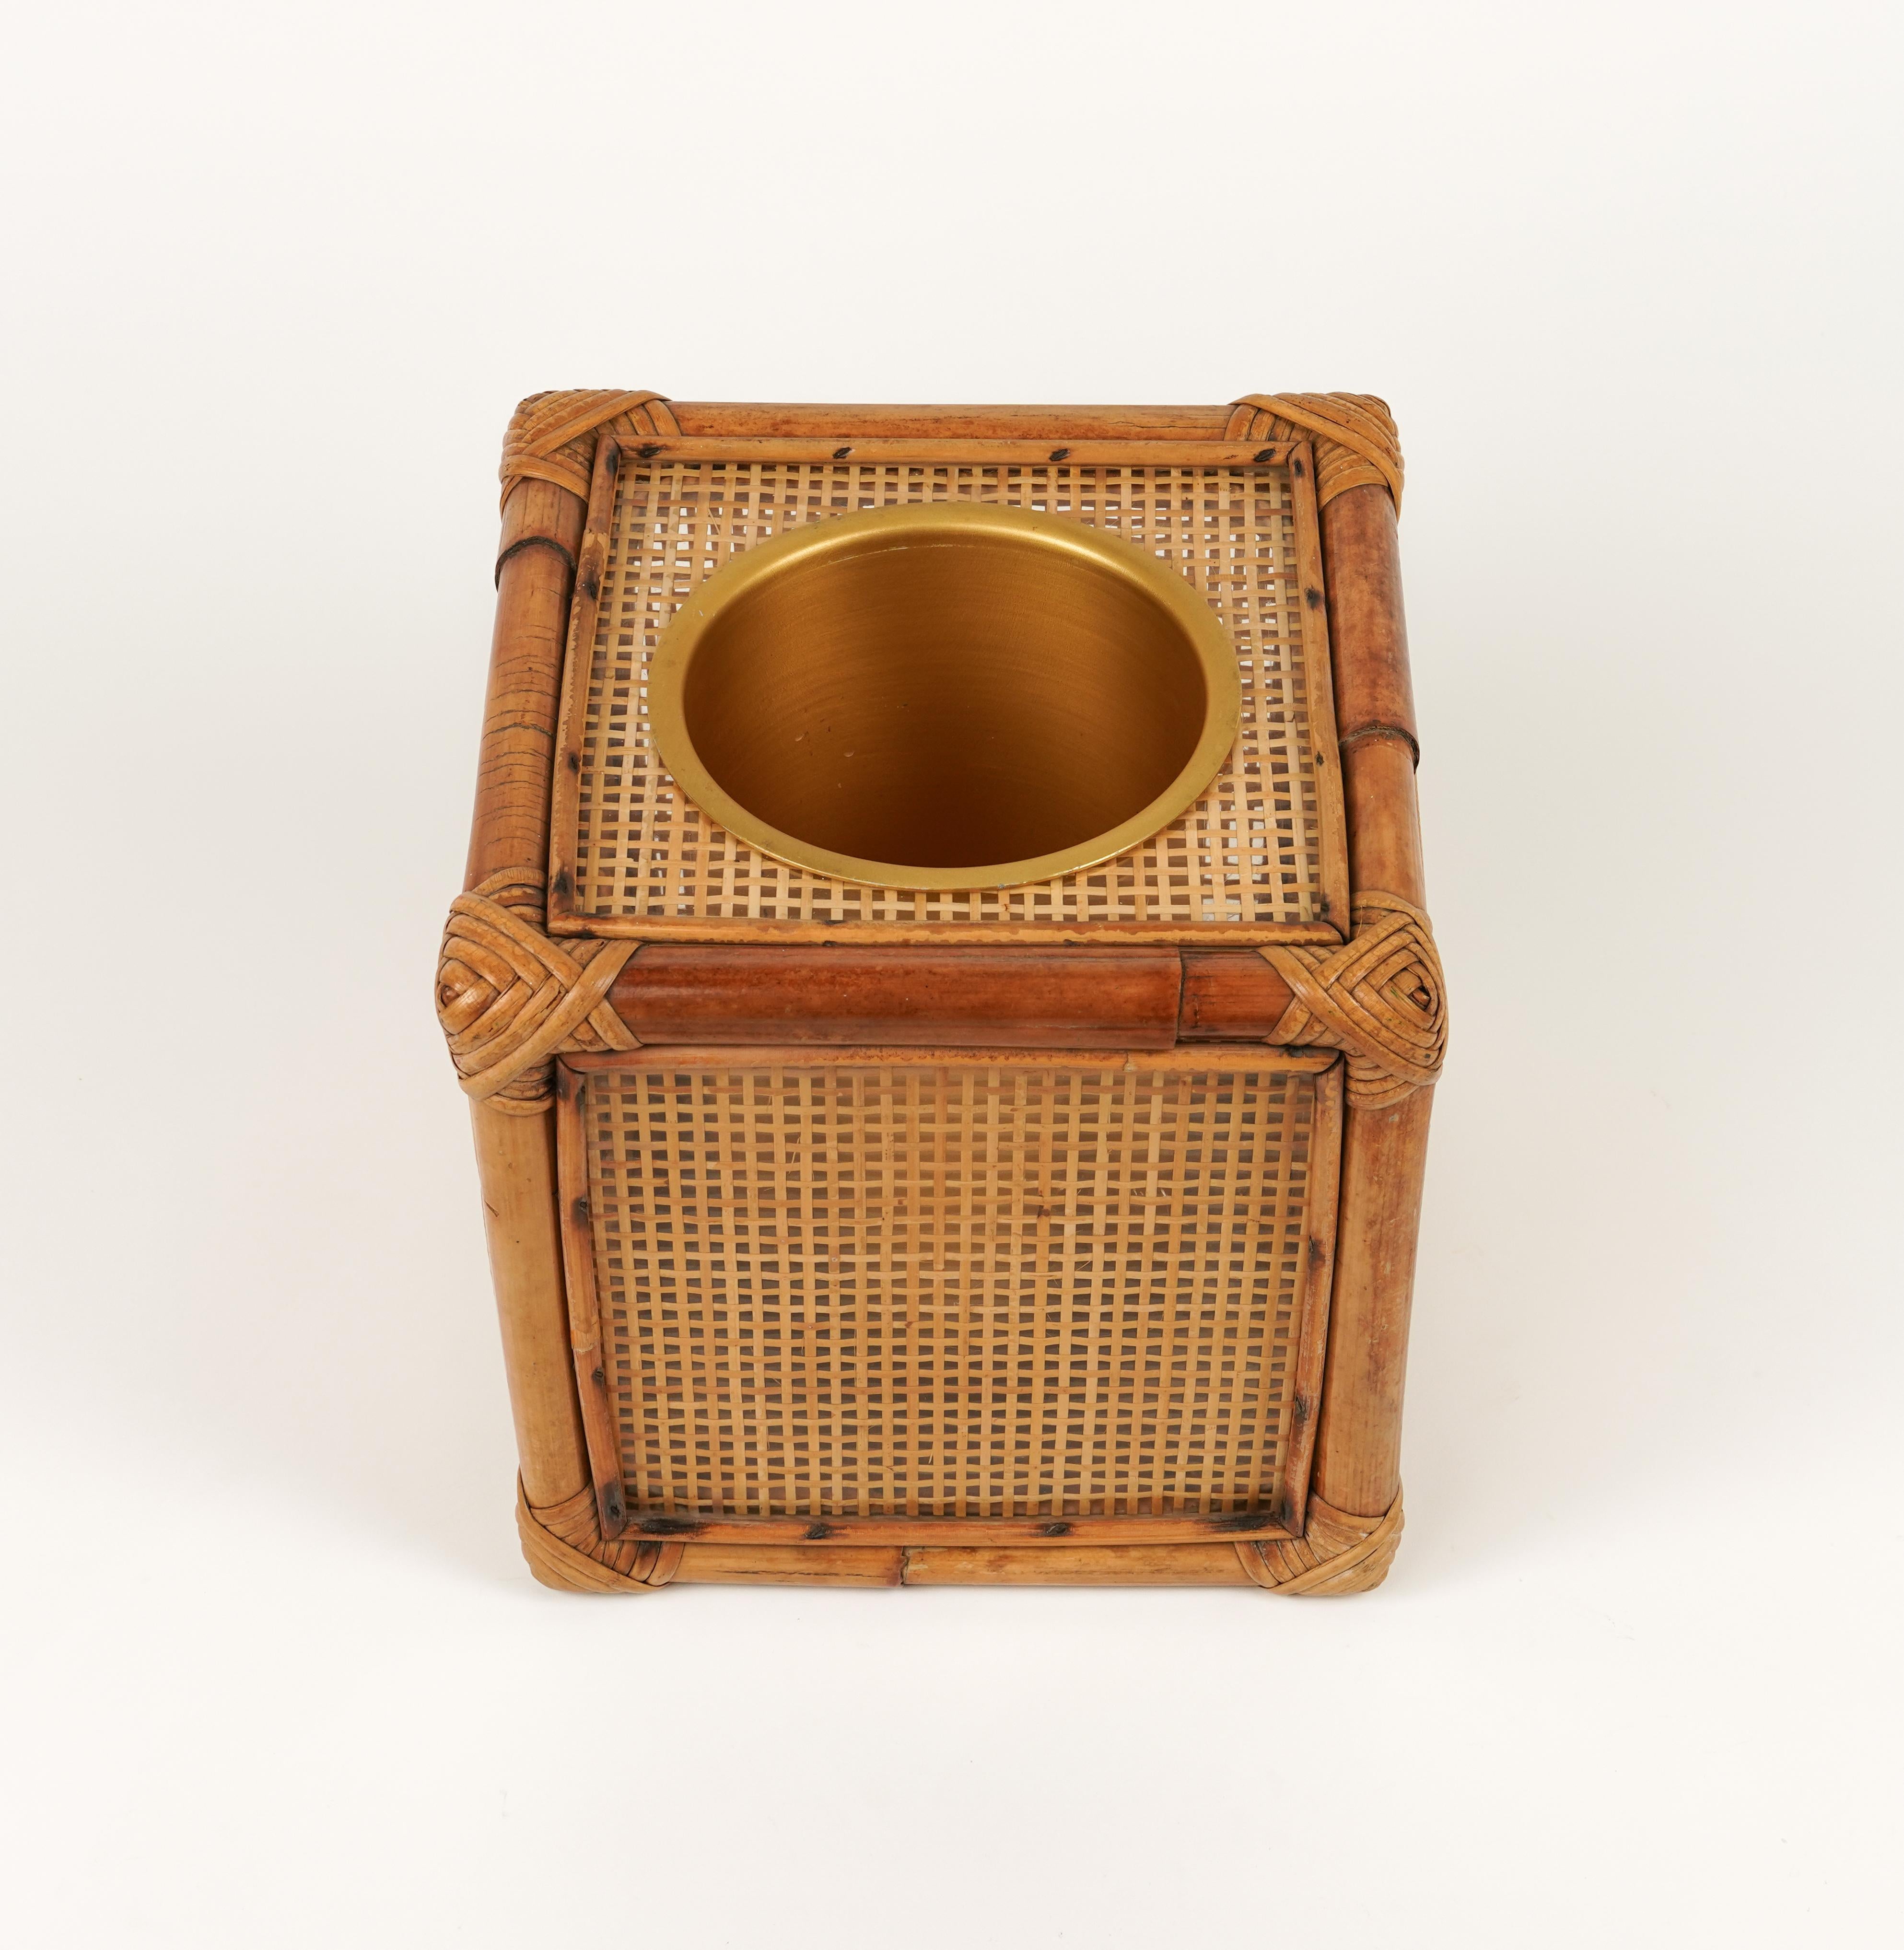 Ice Bucket in Bamboo, Rattan and Lucite Christian Dior Style, Italy 1970s For Sale 1